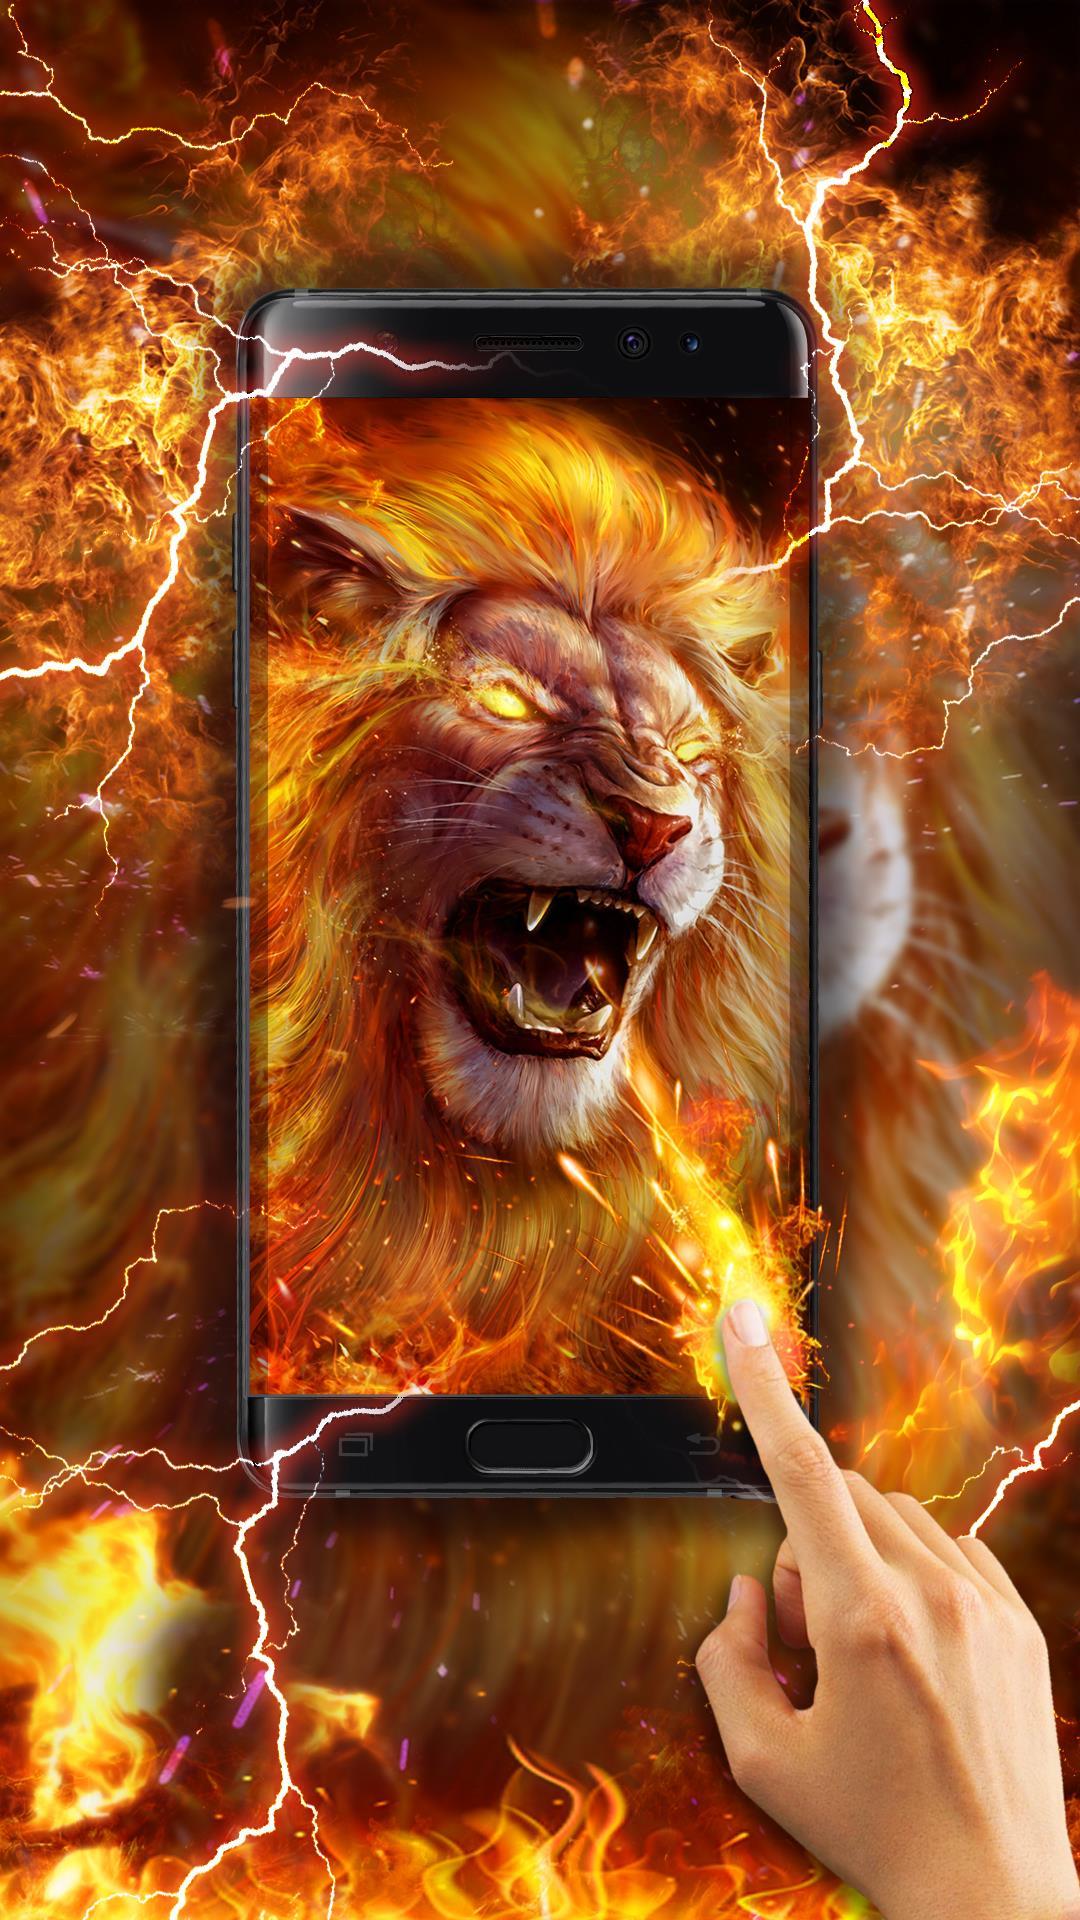 Roaring Lion Live Wallpaper APK  for Android – Download Roaring Lion  Live Wallpaper XAPK (APK Bundle) Latest Version from 